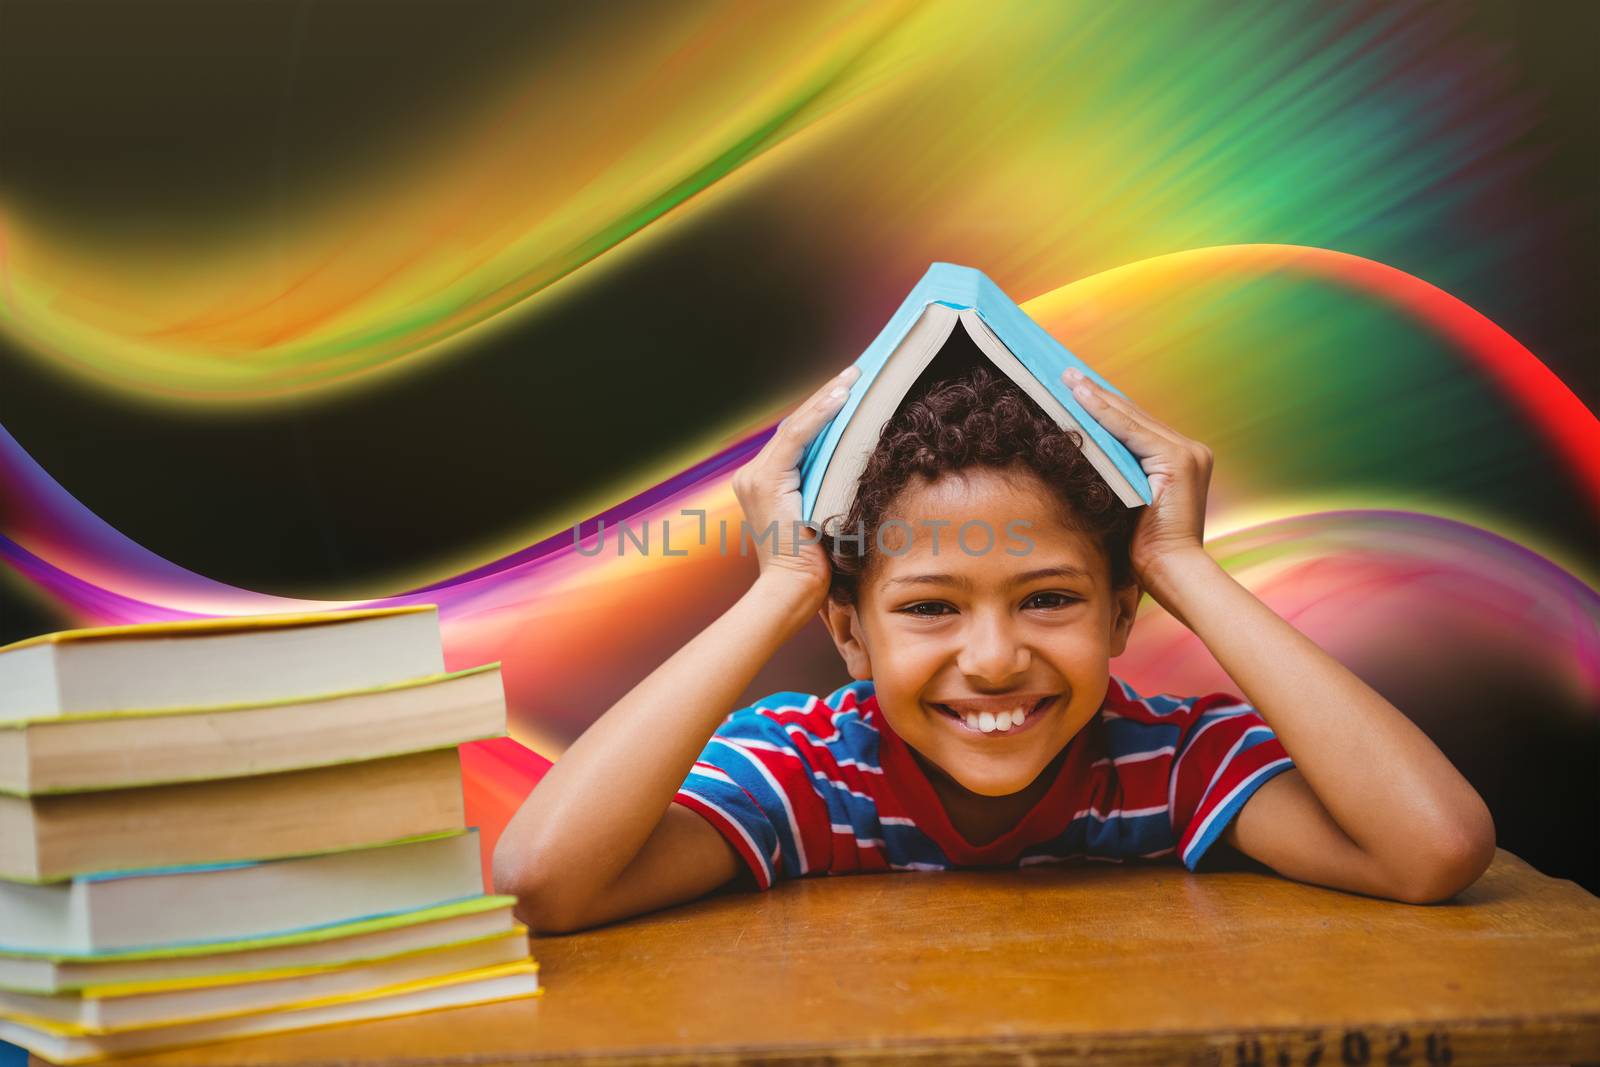 Pupil with many books against glowing abstract design